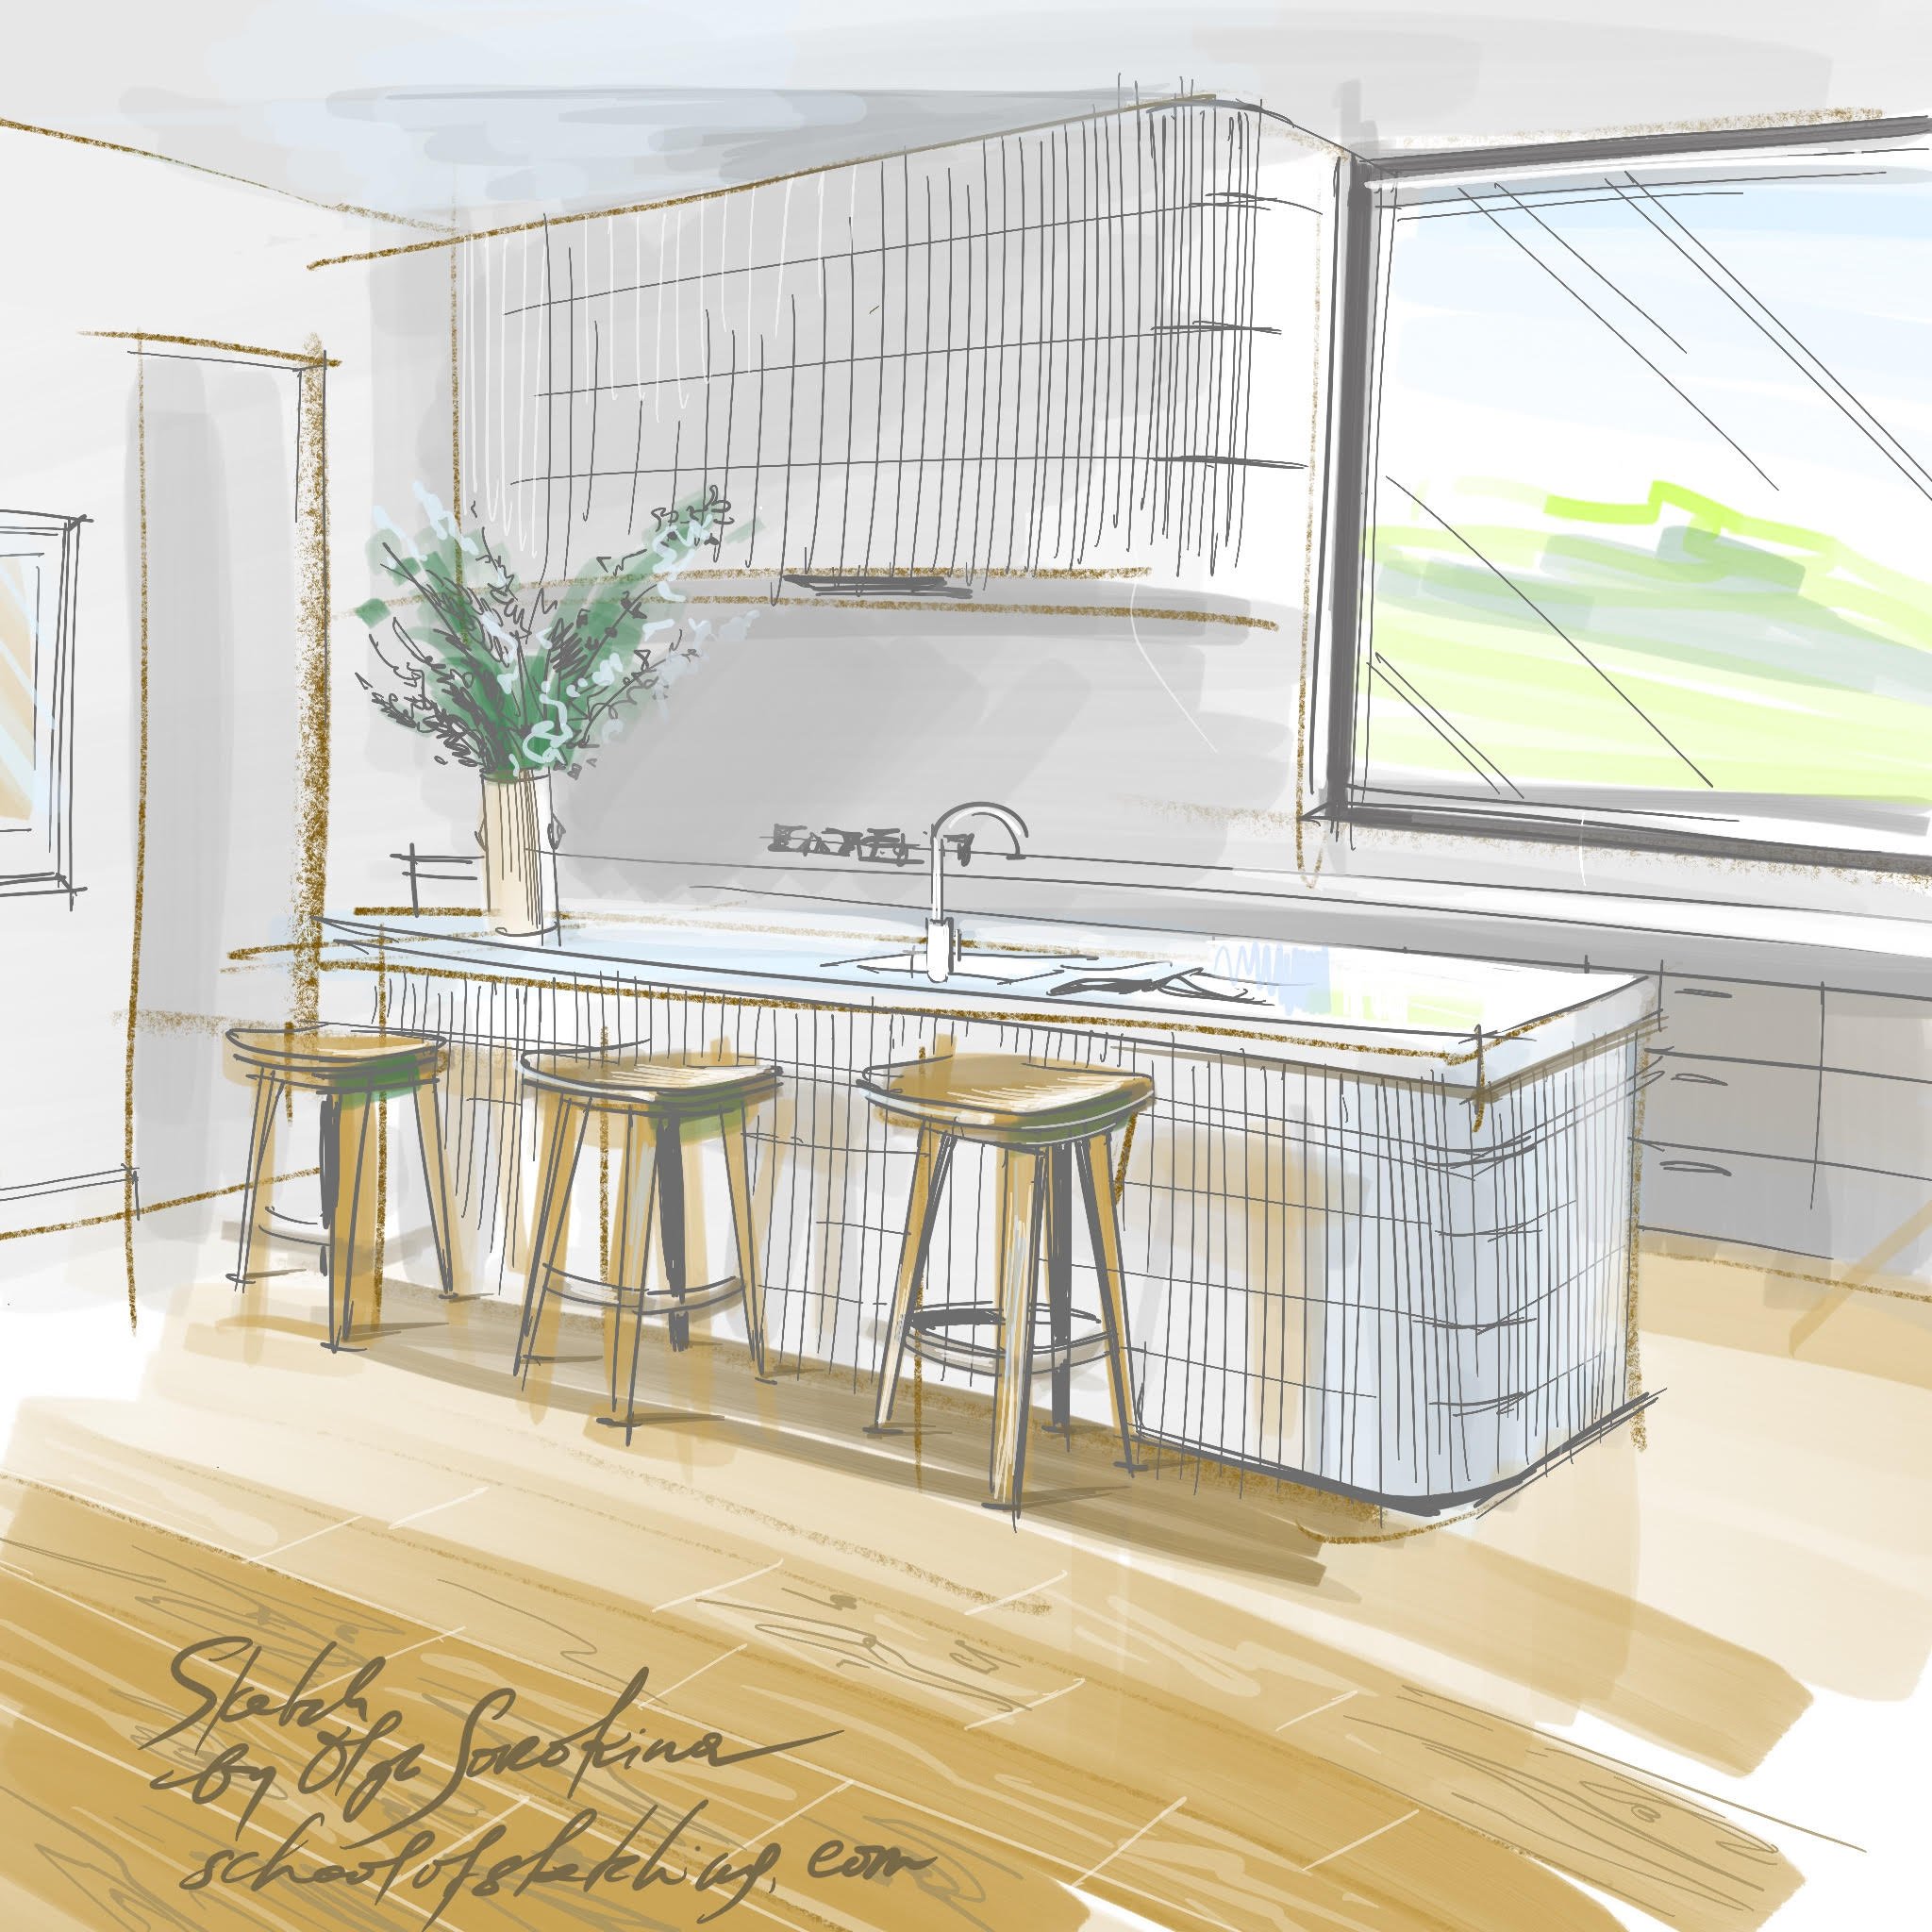 Interior Design Software - Professionally Visualize Your Design Concepts -  RoomSketcher